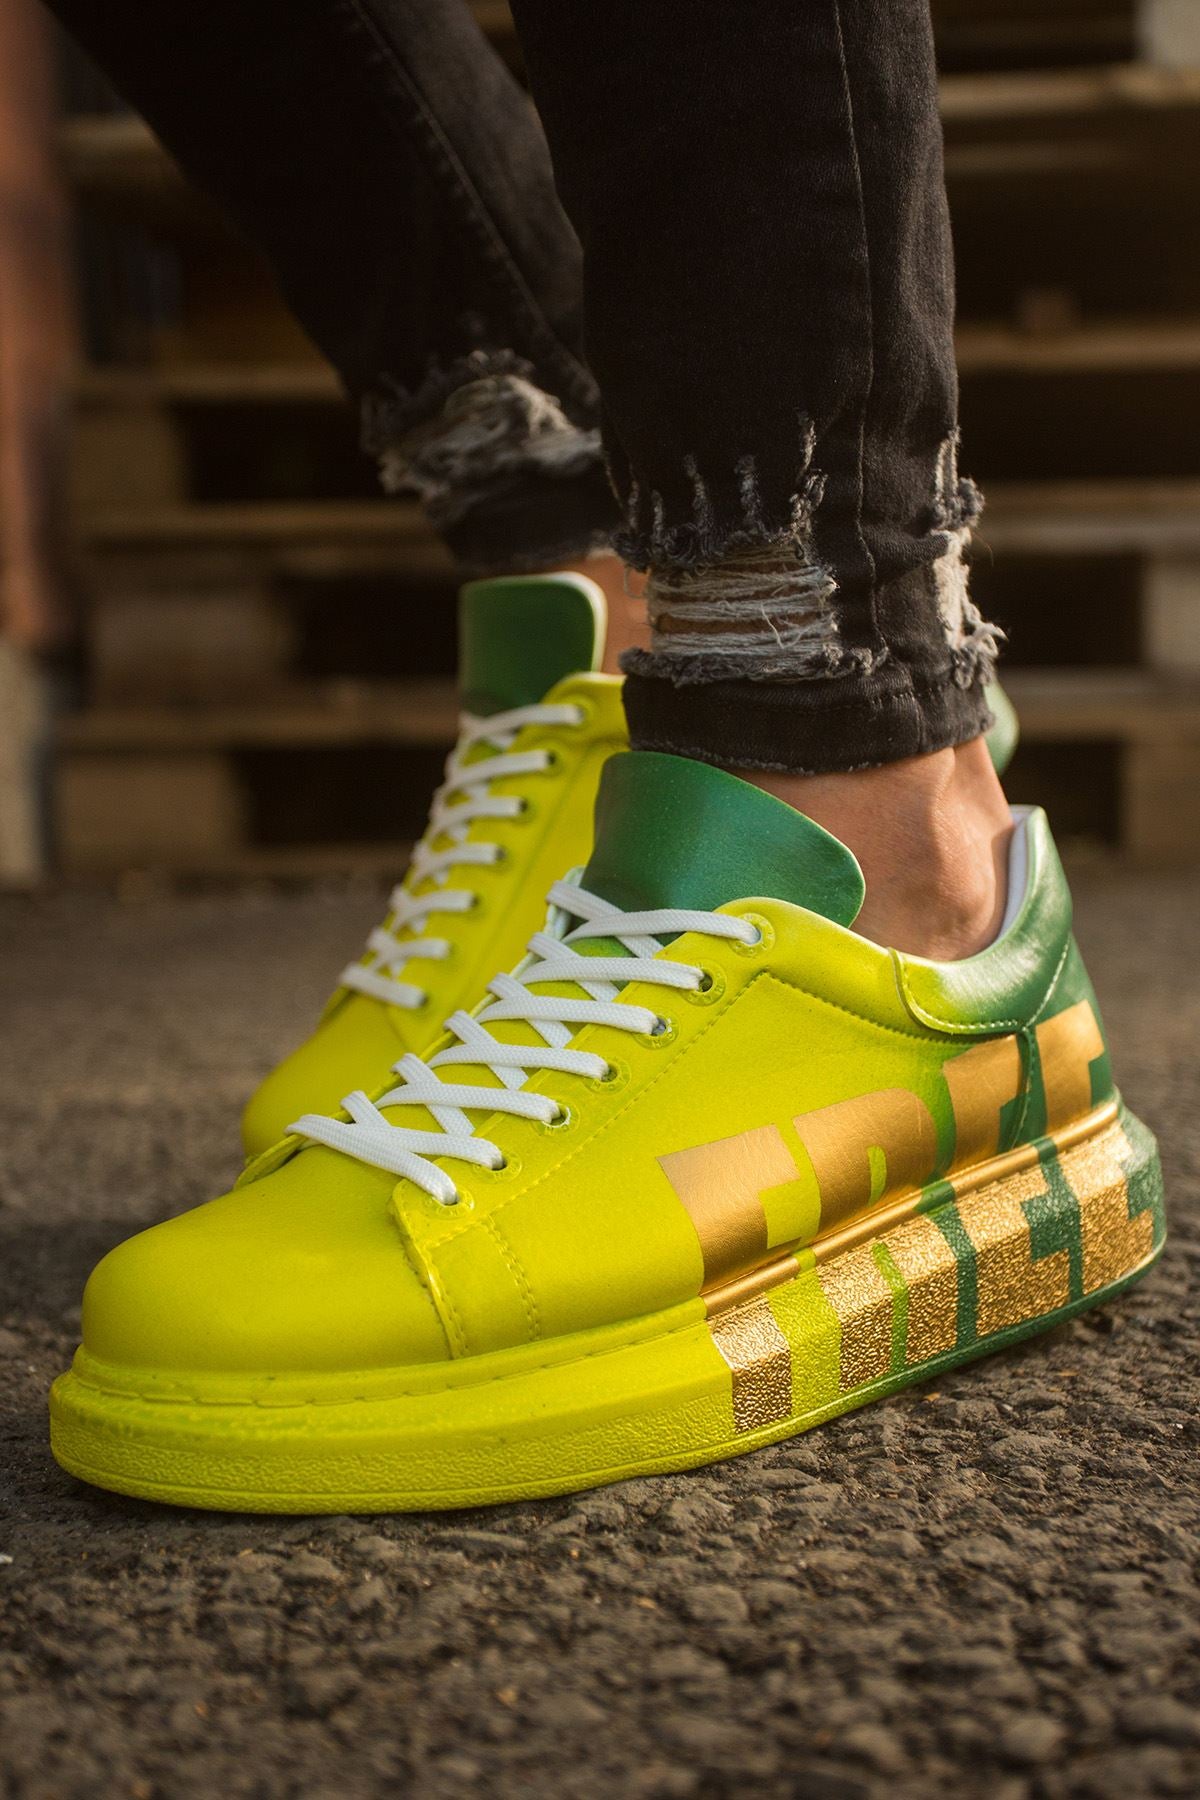 CH254 Yellow-Green Casual Men's Unisex Sneaker Sports Shoes - STREETMODE ™